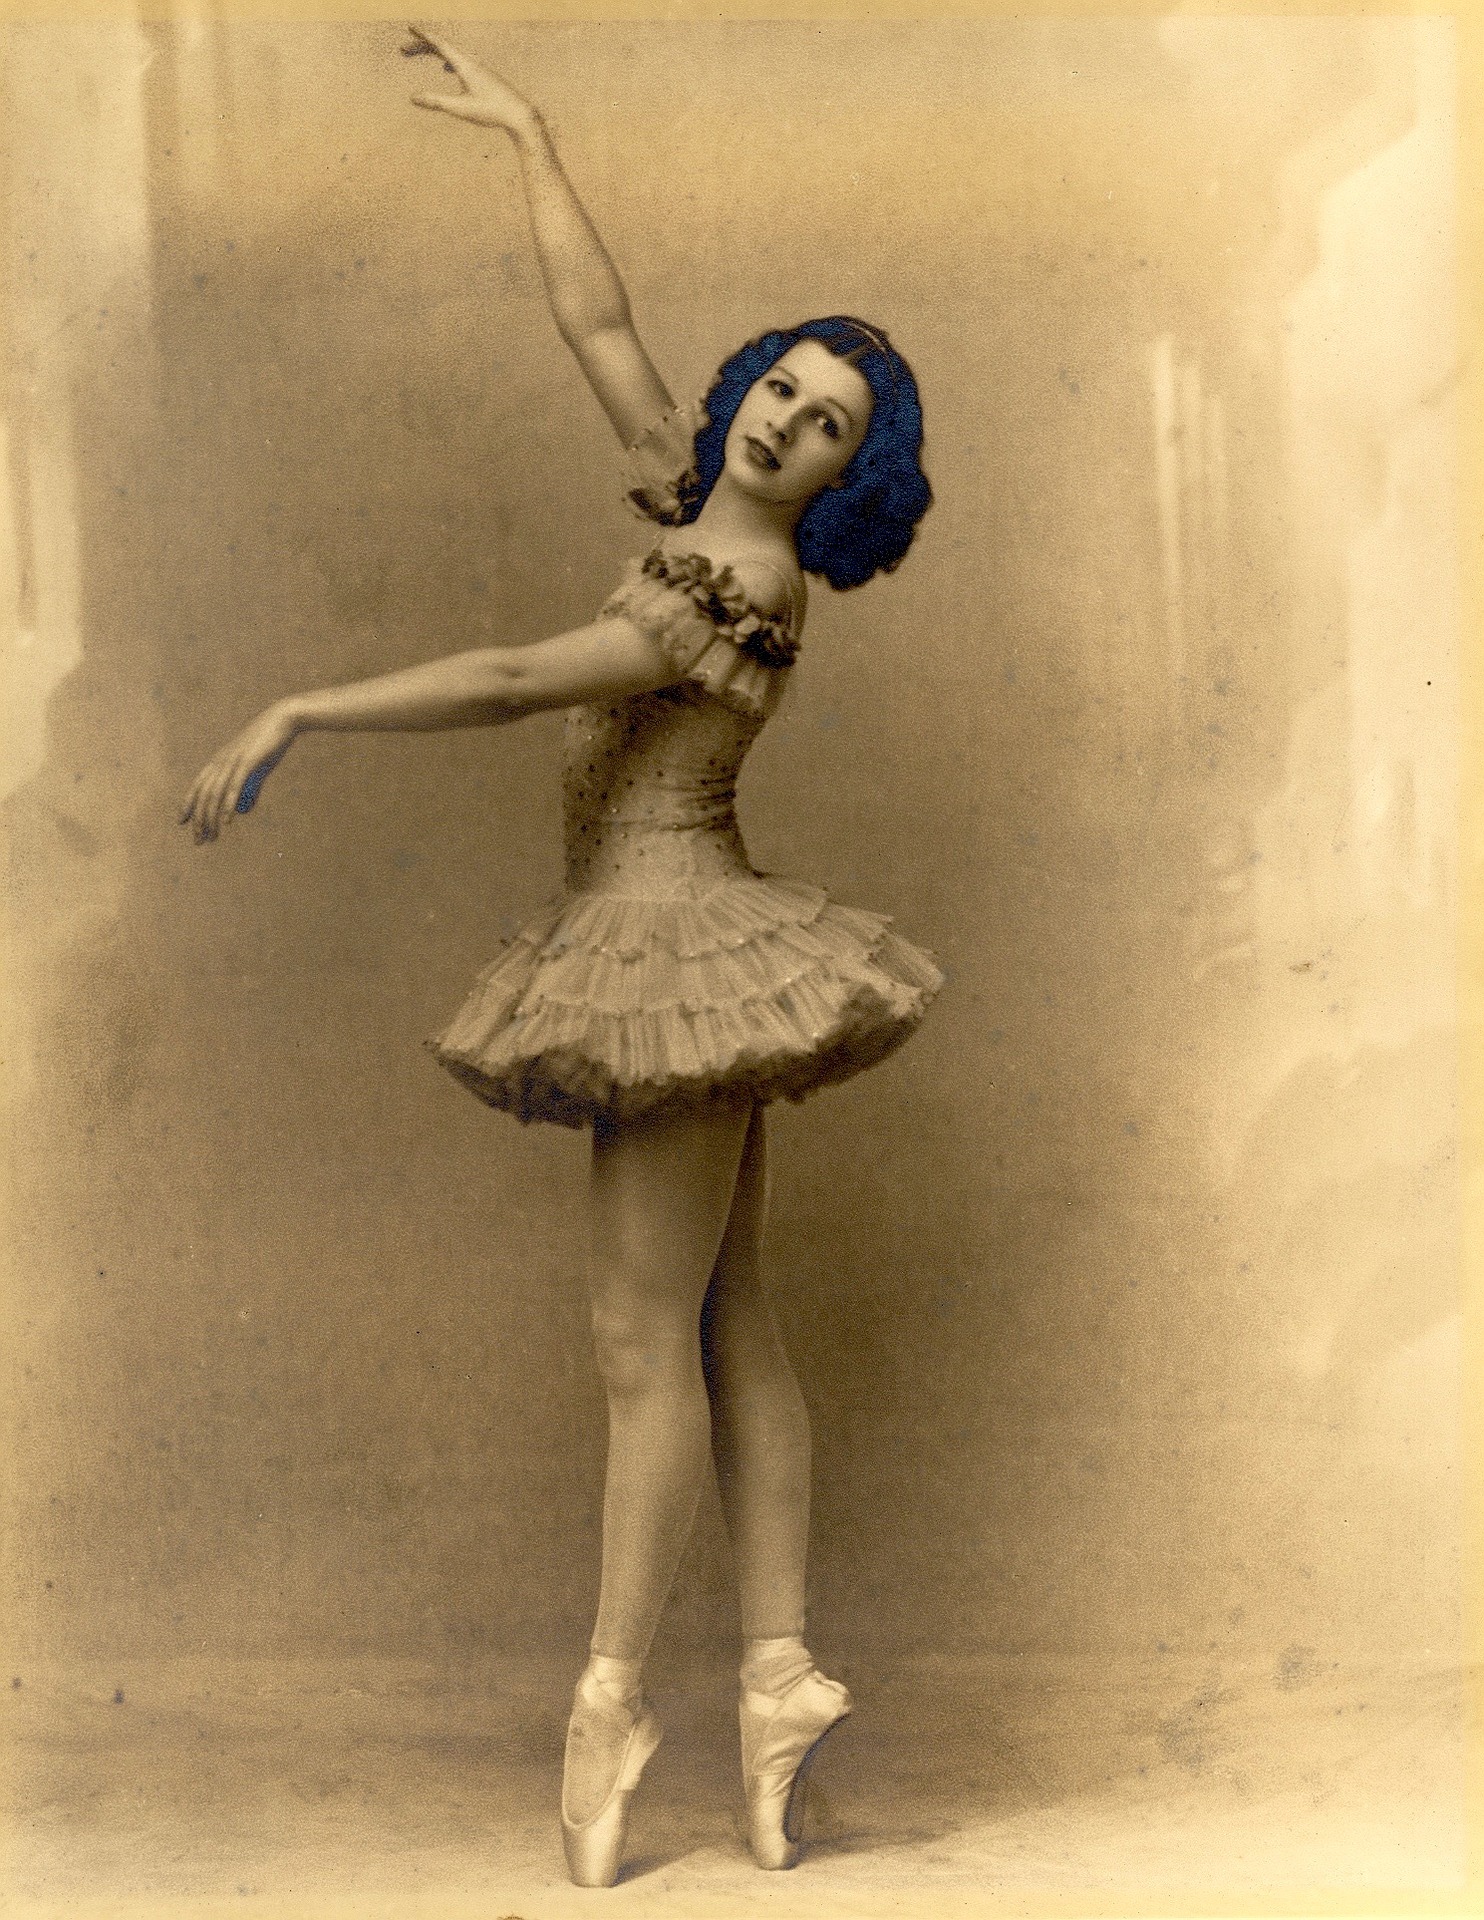 The new slippers with flat bottoms became extremely popular, allowing dancers to expand their skills.